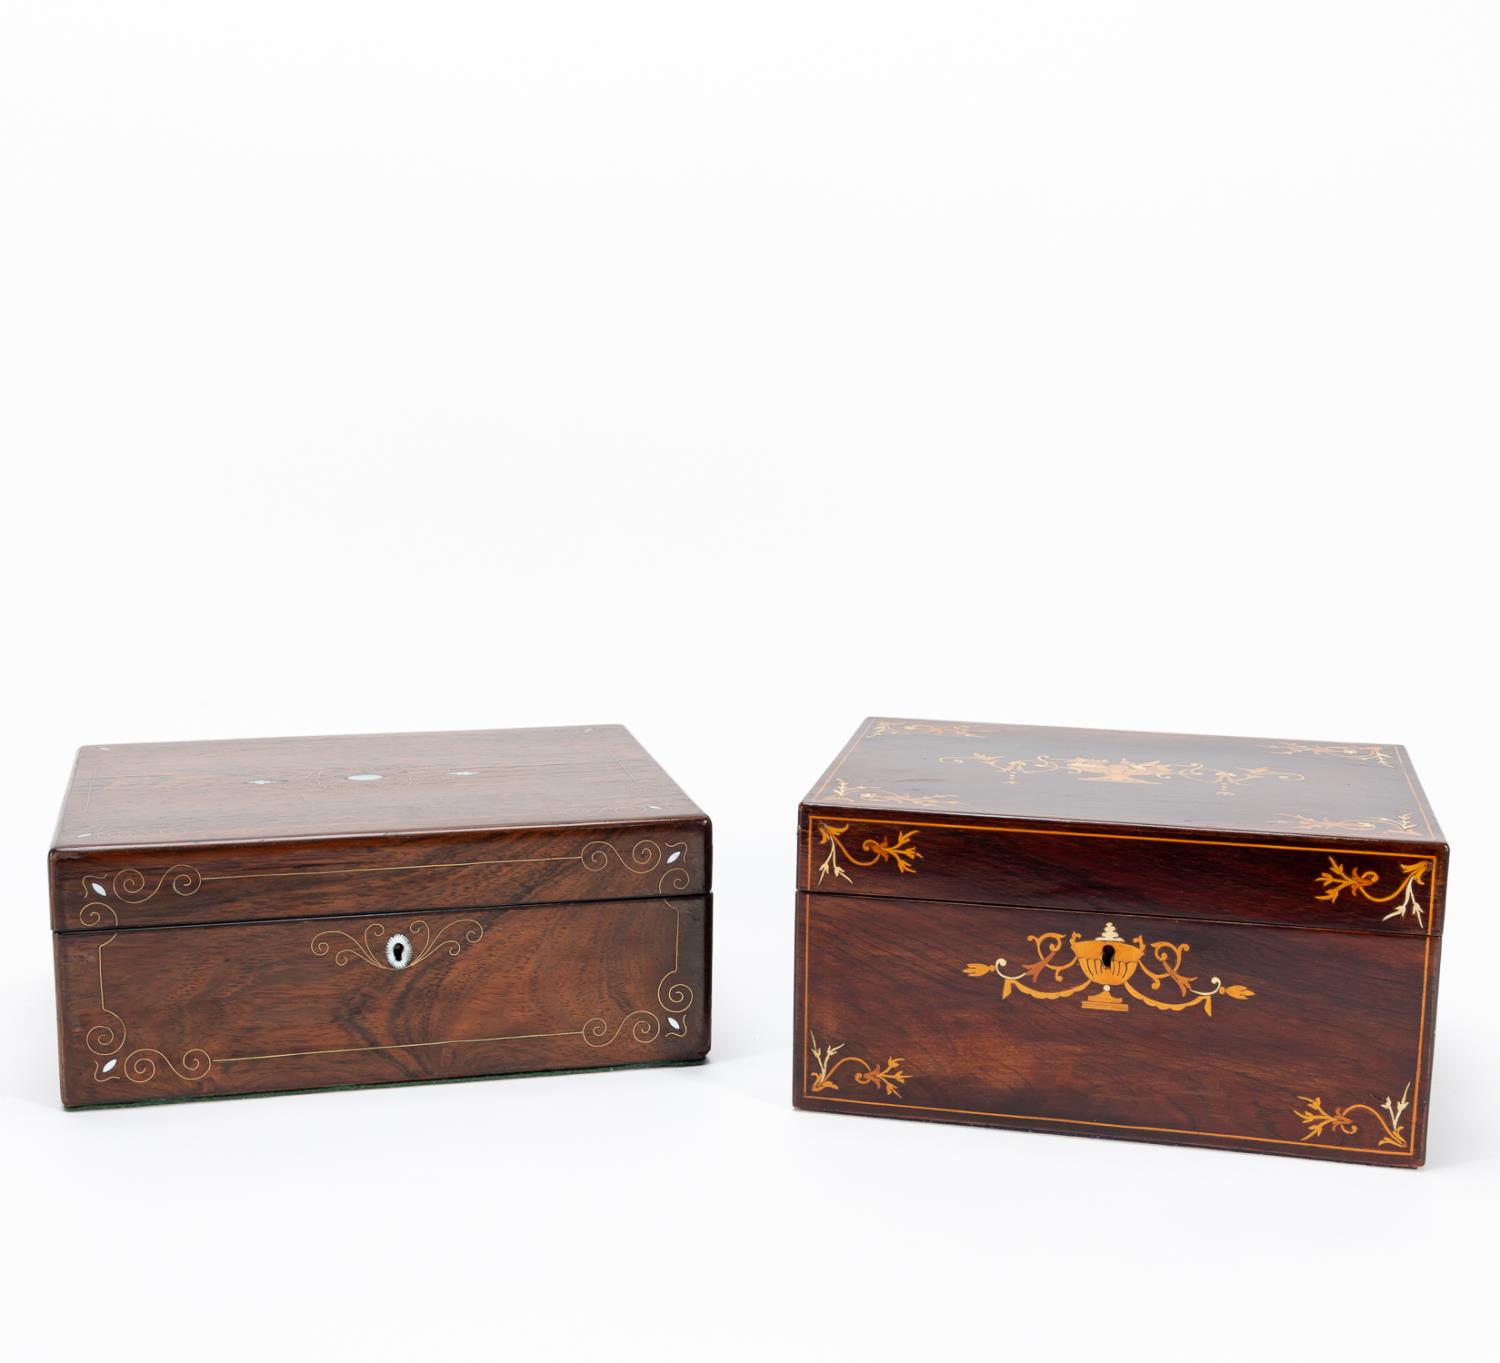 TWO PIECES 19TH C ENGLISH INLAID 35a60b